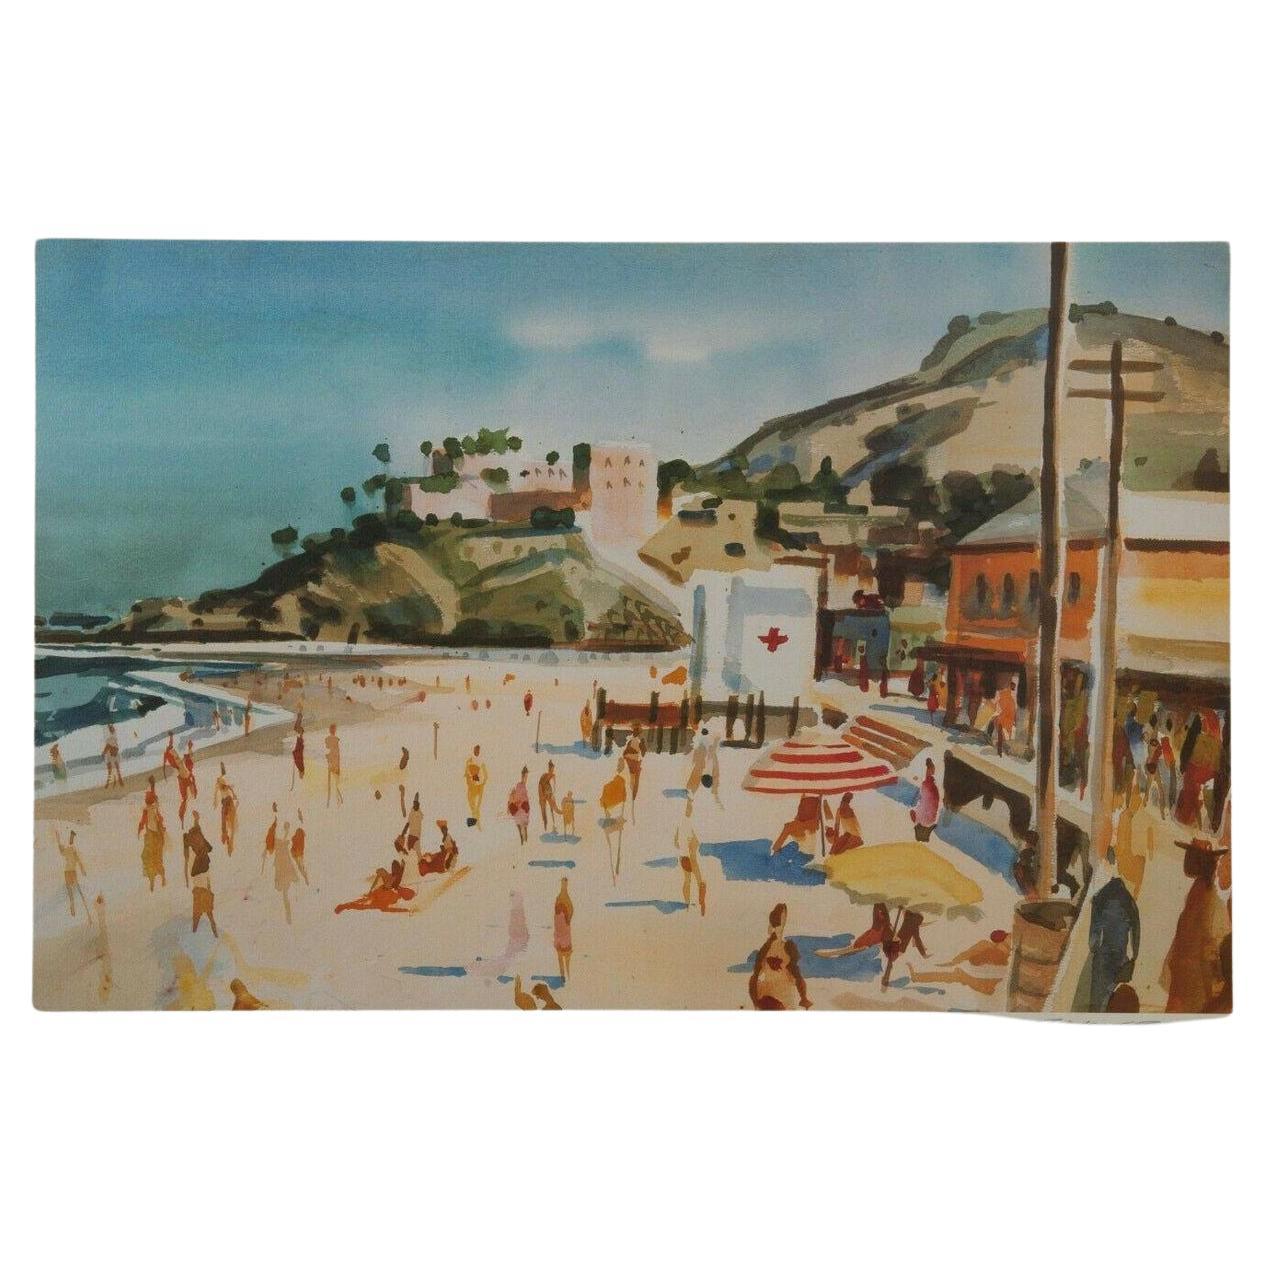 Milford Zornes "Main Beach Laguna" Lithograph Print Limited 62 of 250 Signed For Sale